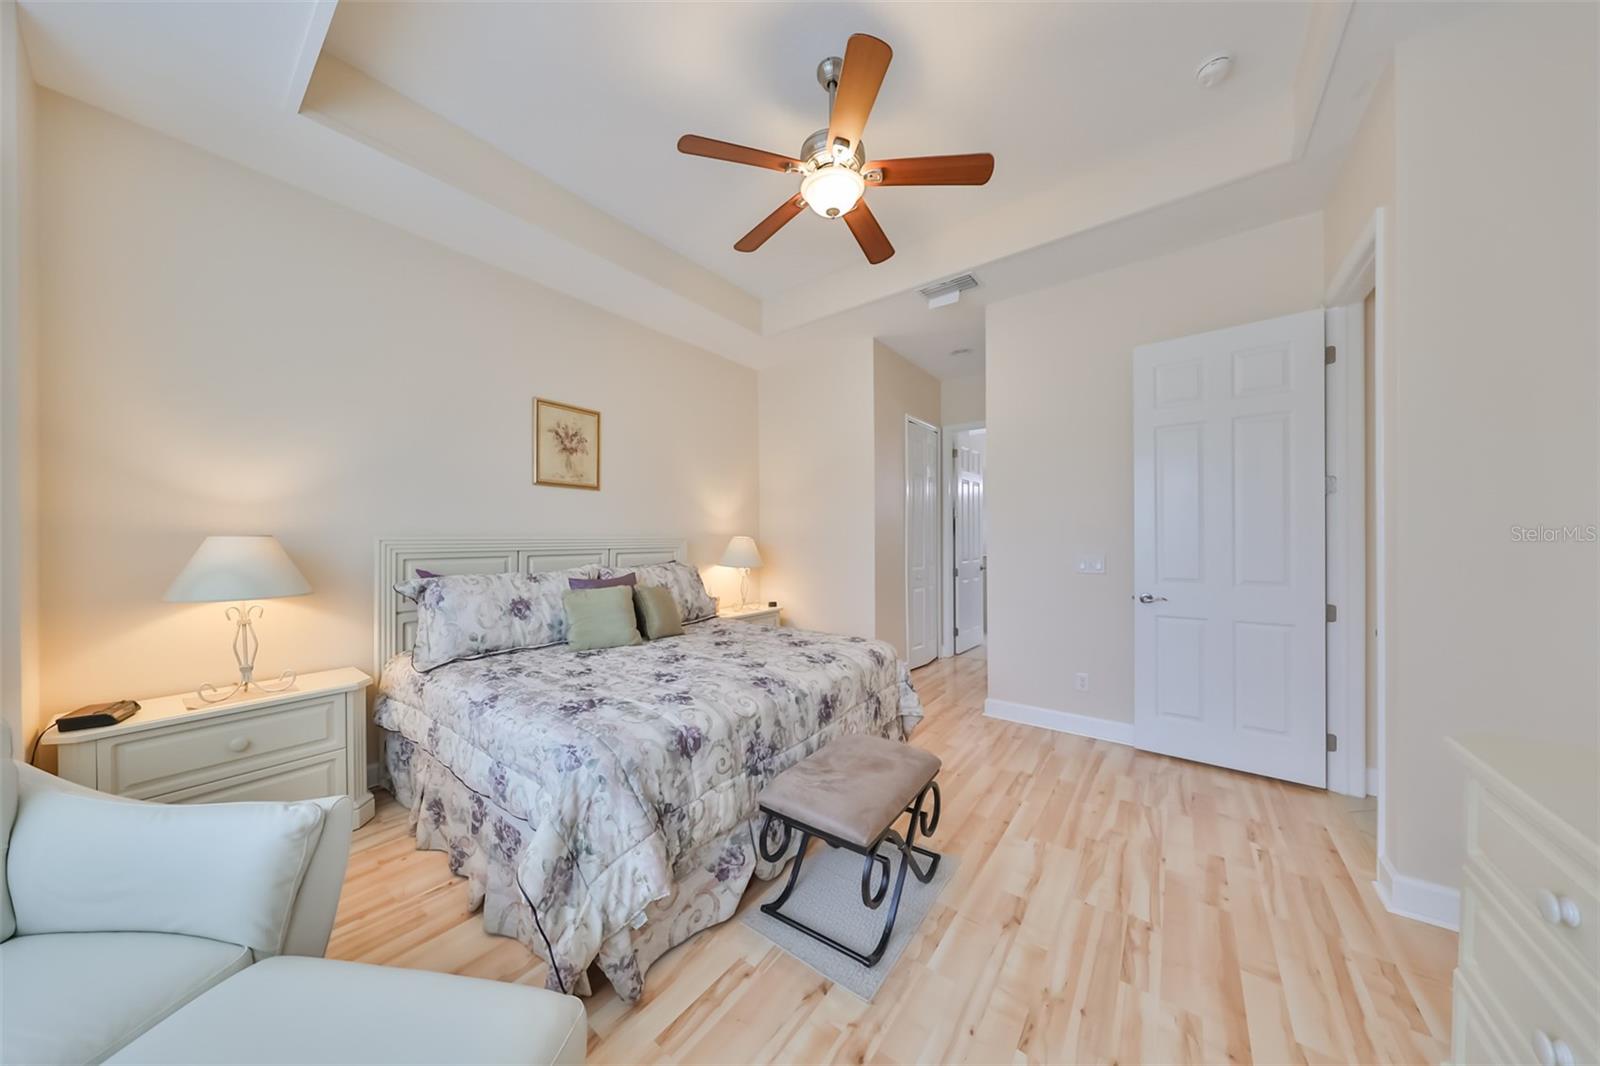 Primary Bedroom has a trey ceiling, walk-in closets and that uncluttered, serene feel for ultimate relaxation.